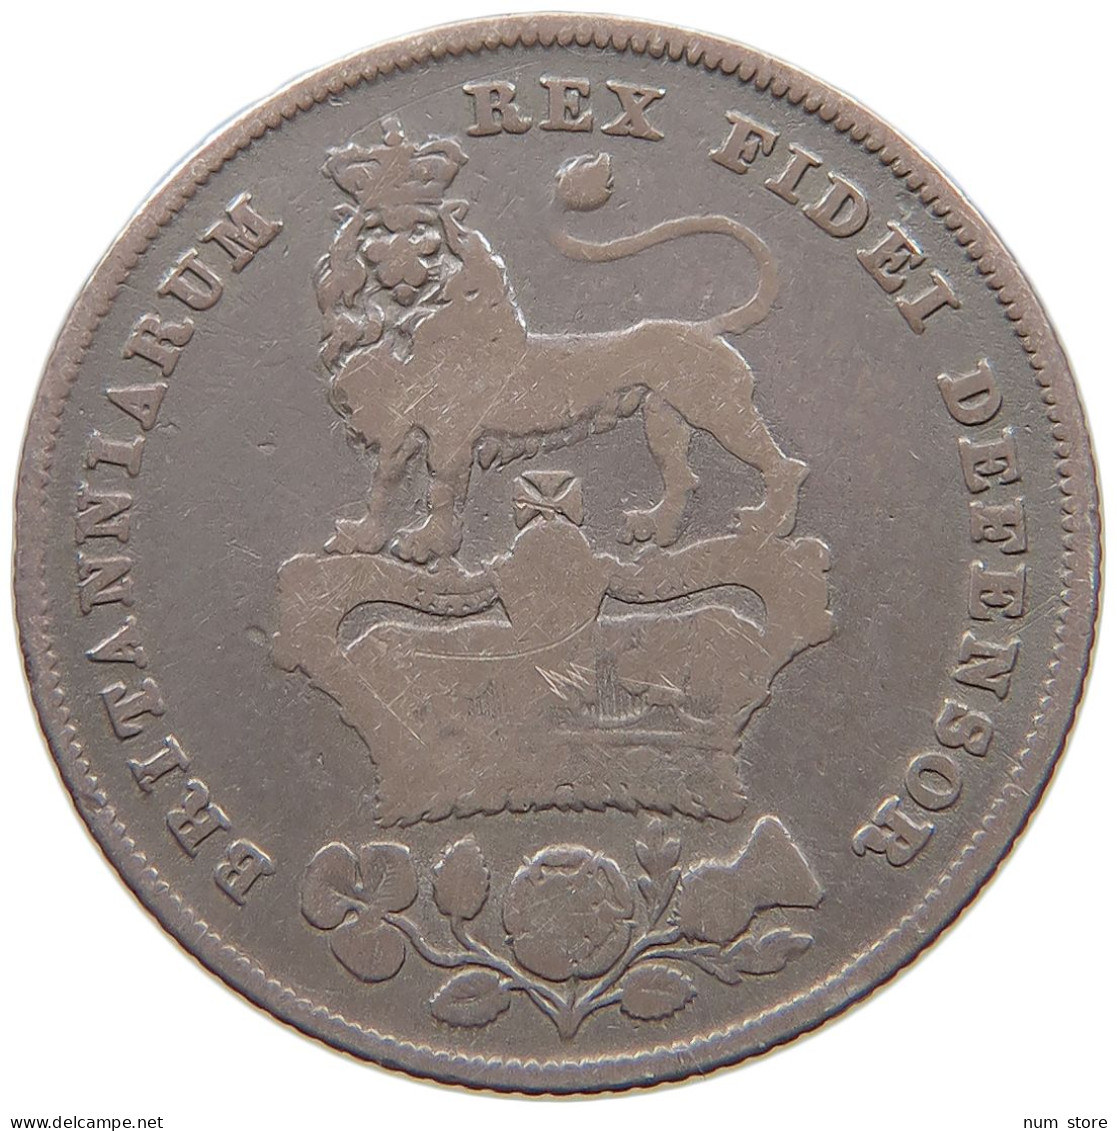 GREAT BRITAIN SHILLING 1826 GEORGE IV. (1820-1830) #t160 0425 - I. 1 Shilling